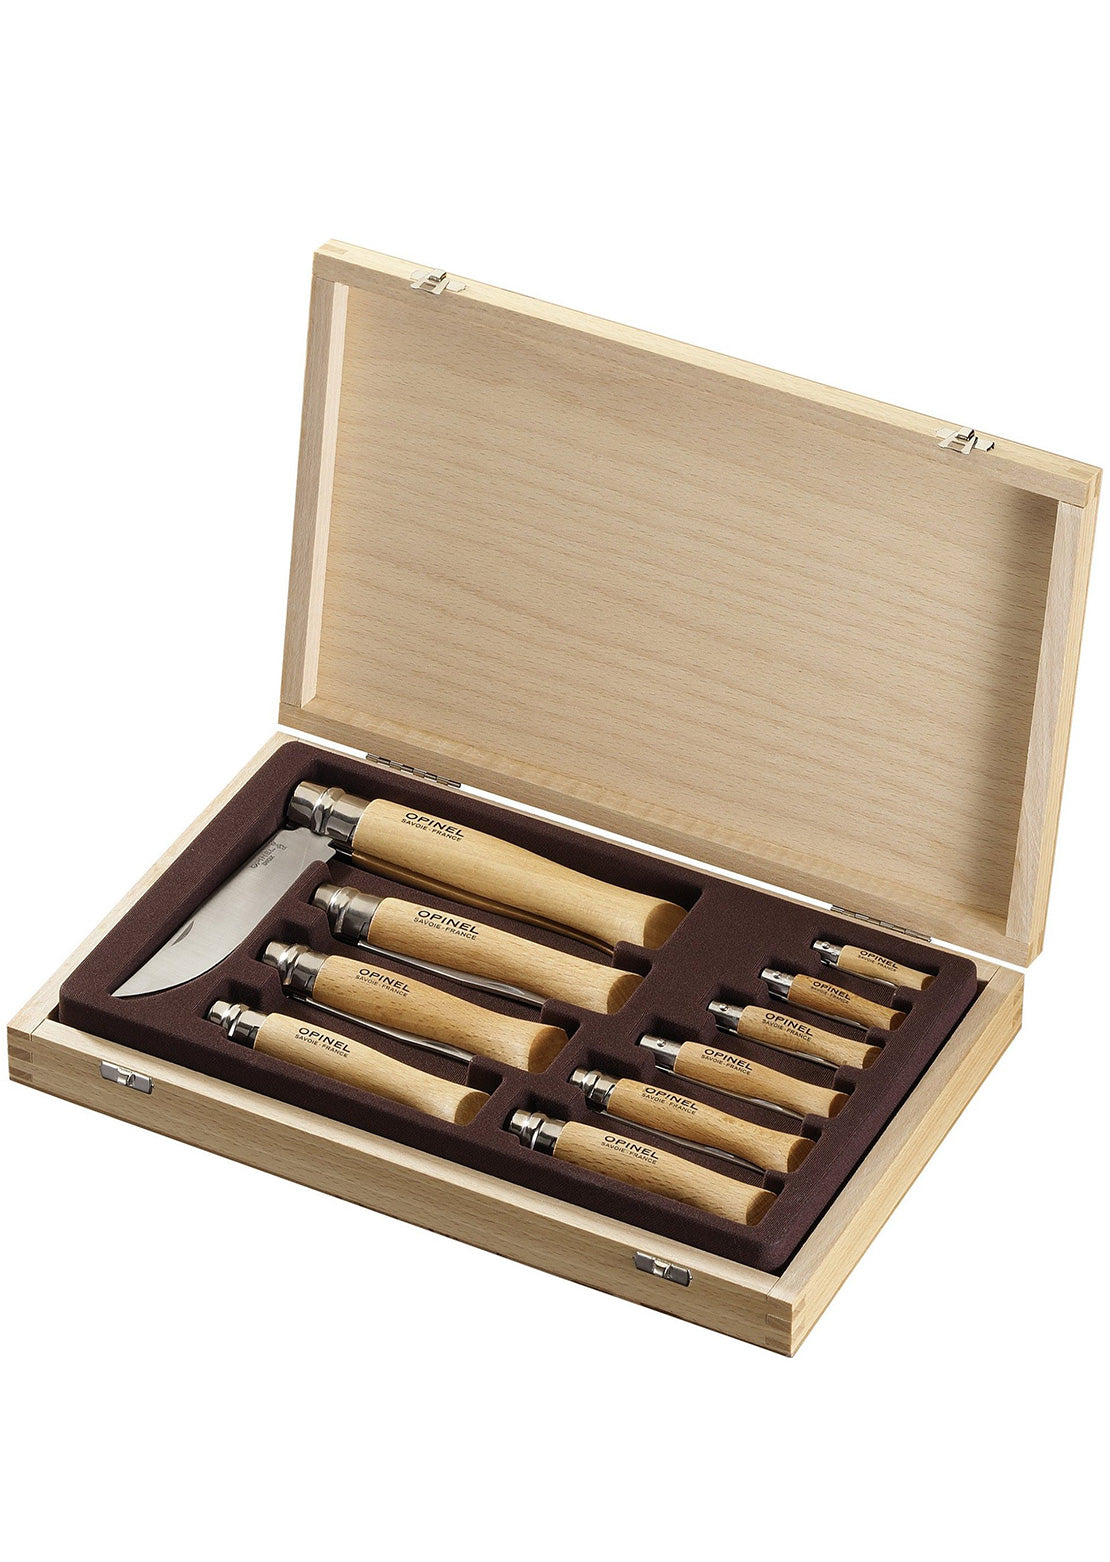 Opinel Tradition Collection 10 Stainless Steel Knives Box Set Beech Wood